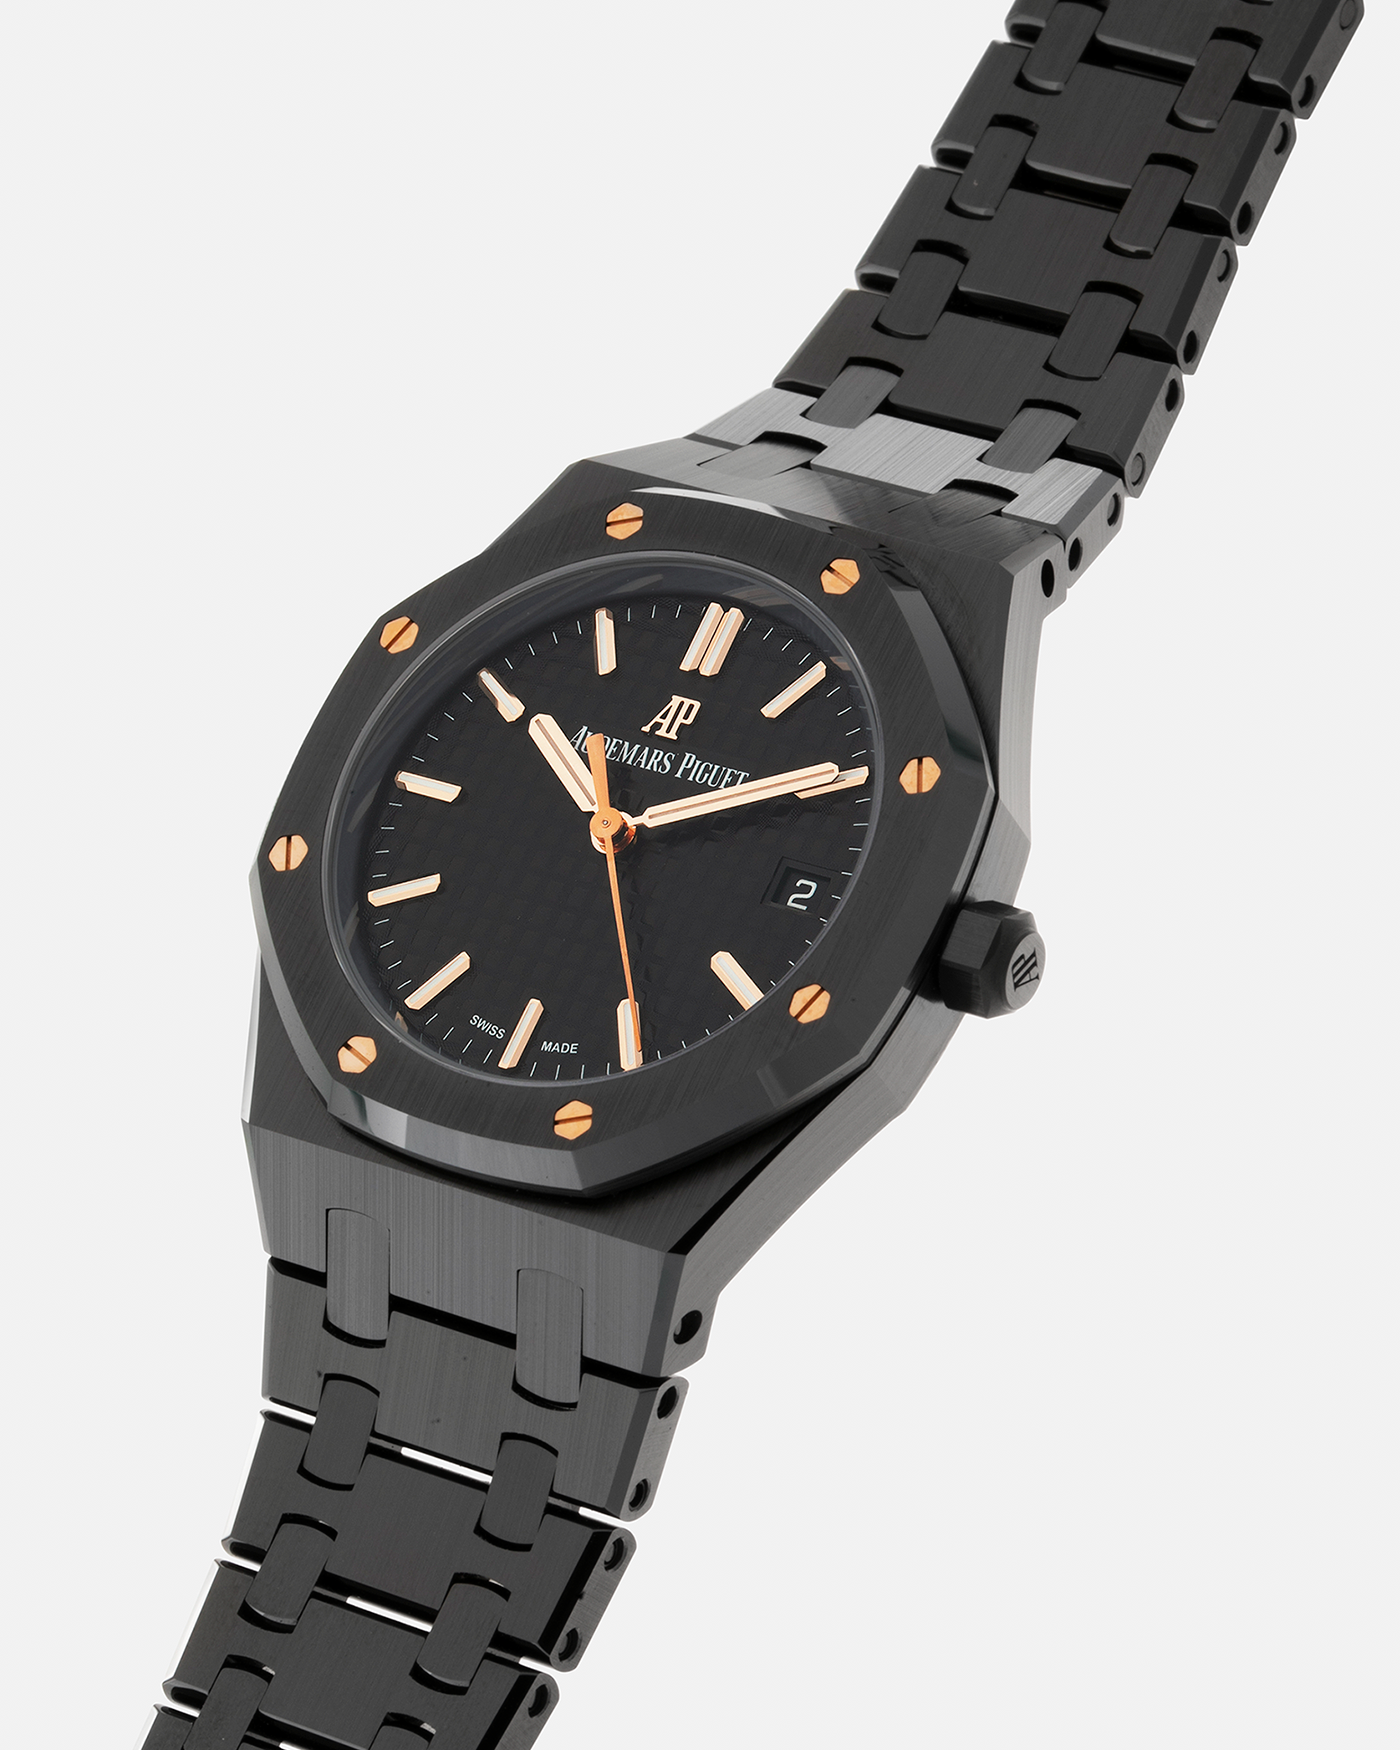 Brand: Audemars Piguet Year: 2021 Model: Royal Oak Reference Number: 77350CE Material: Ceramic Case and Bracelet, Titanium Clasp and Caseback Movement: Vaucher-based Cal. 5800, Self-Winding Case Dimensions: 34mm x 8.8mm Bracelet: Audemars Piguet Integrated Black Ceramic Bracelet with Signed Titanium Clasp